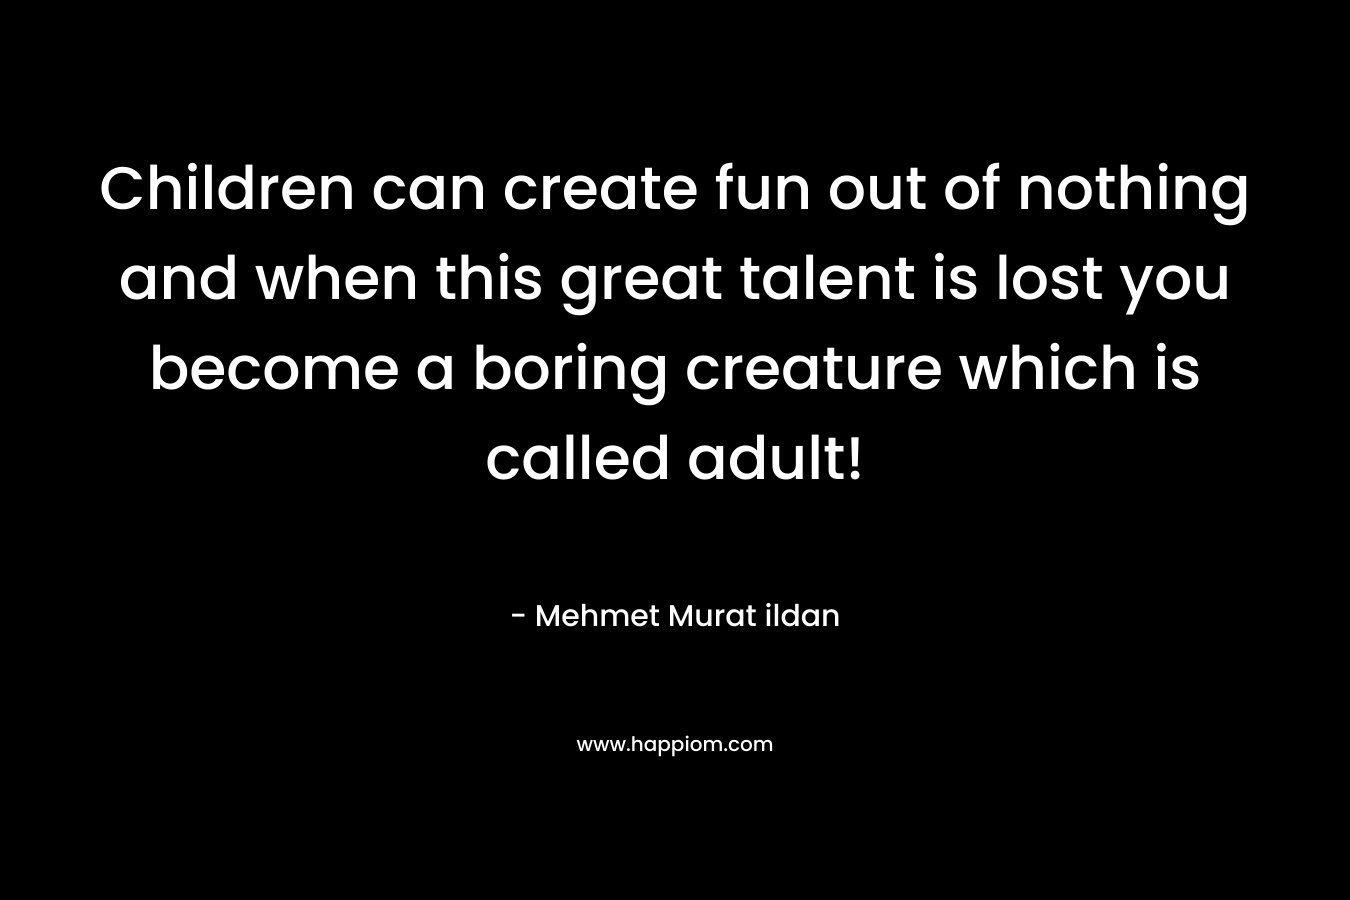 Children can create fun out of nothing and when this great talent is lost you become a boring creature which is called adult!